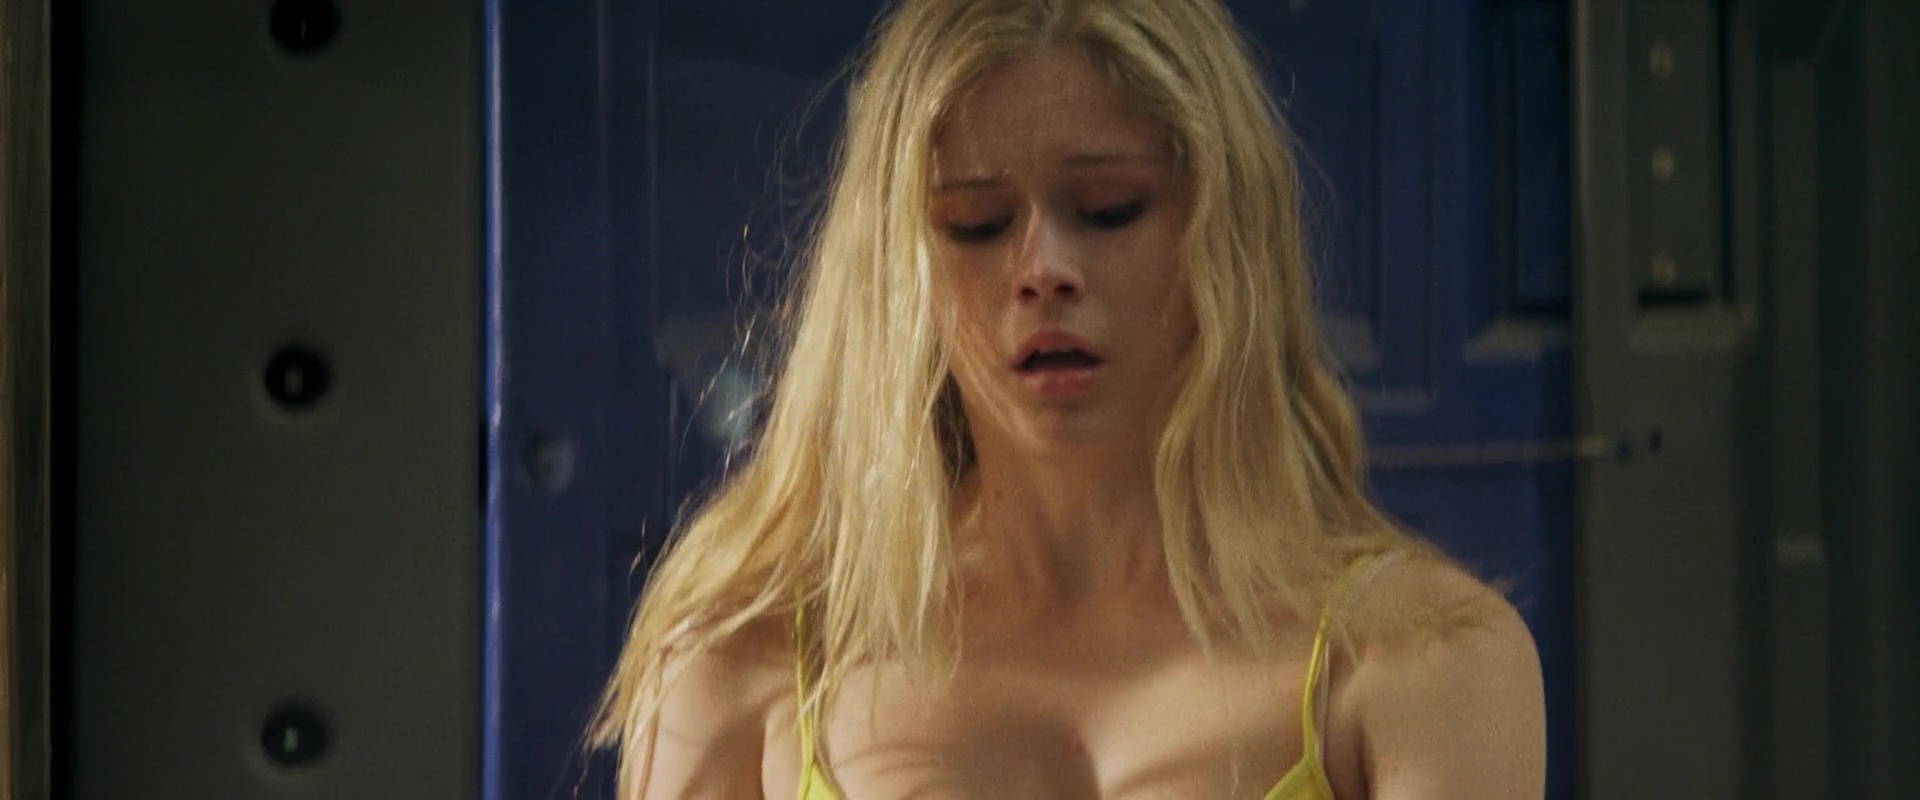 Erin moriarty fappening